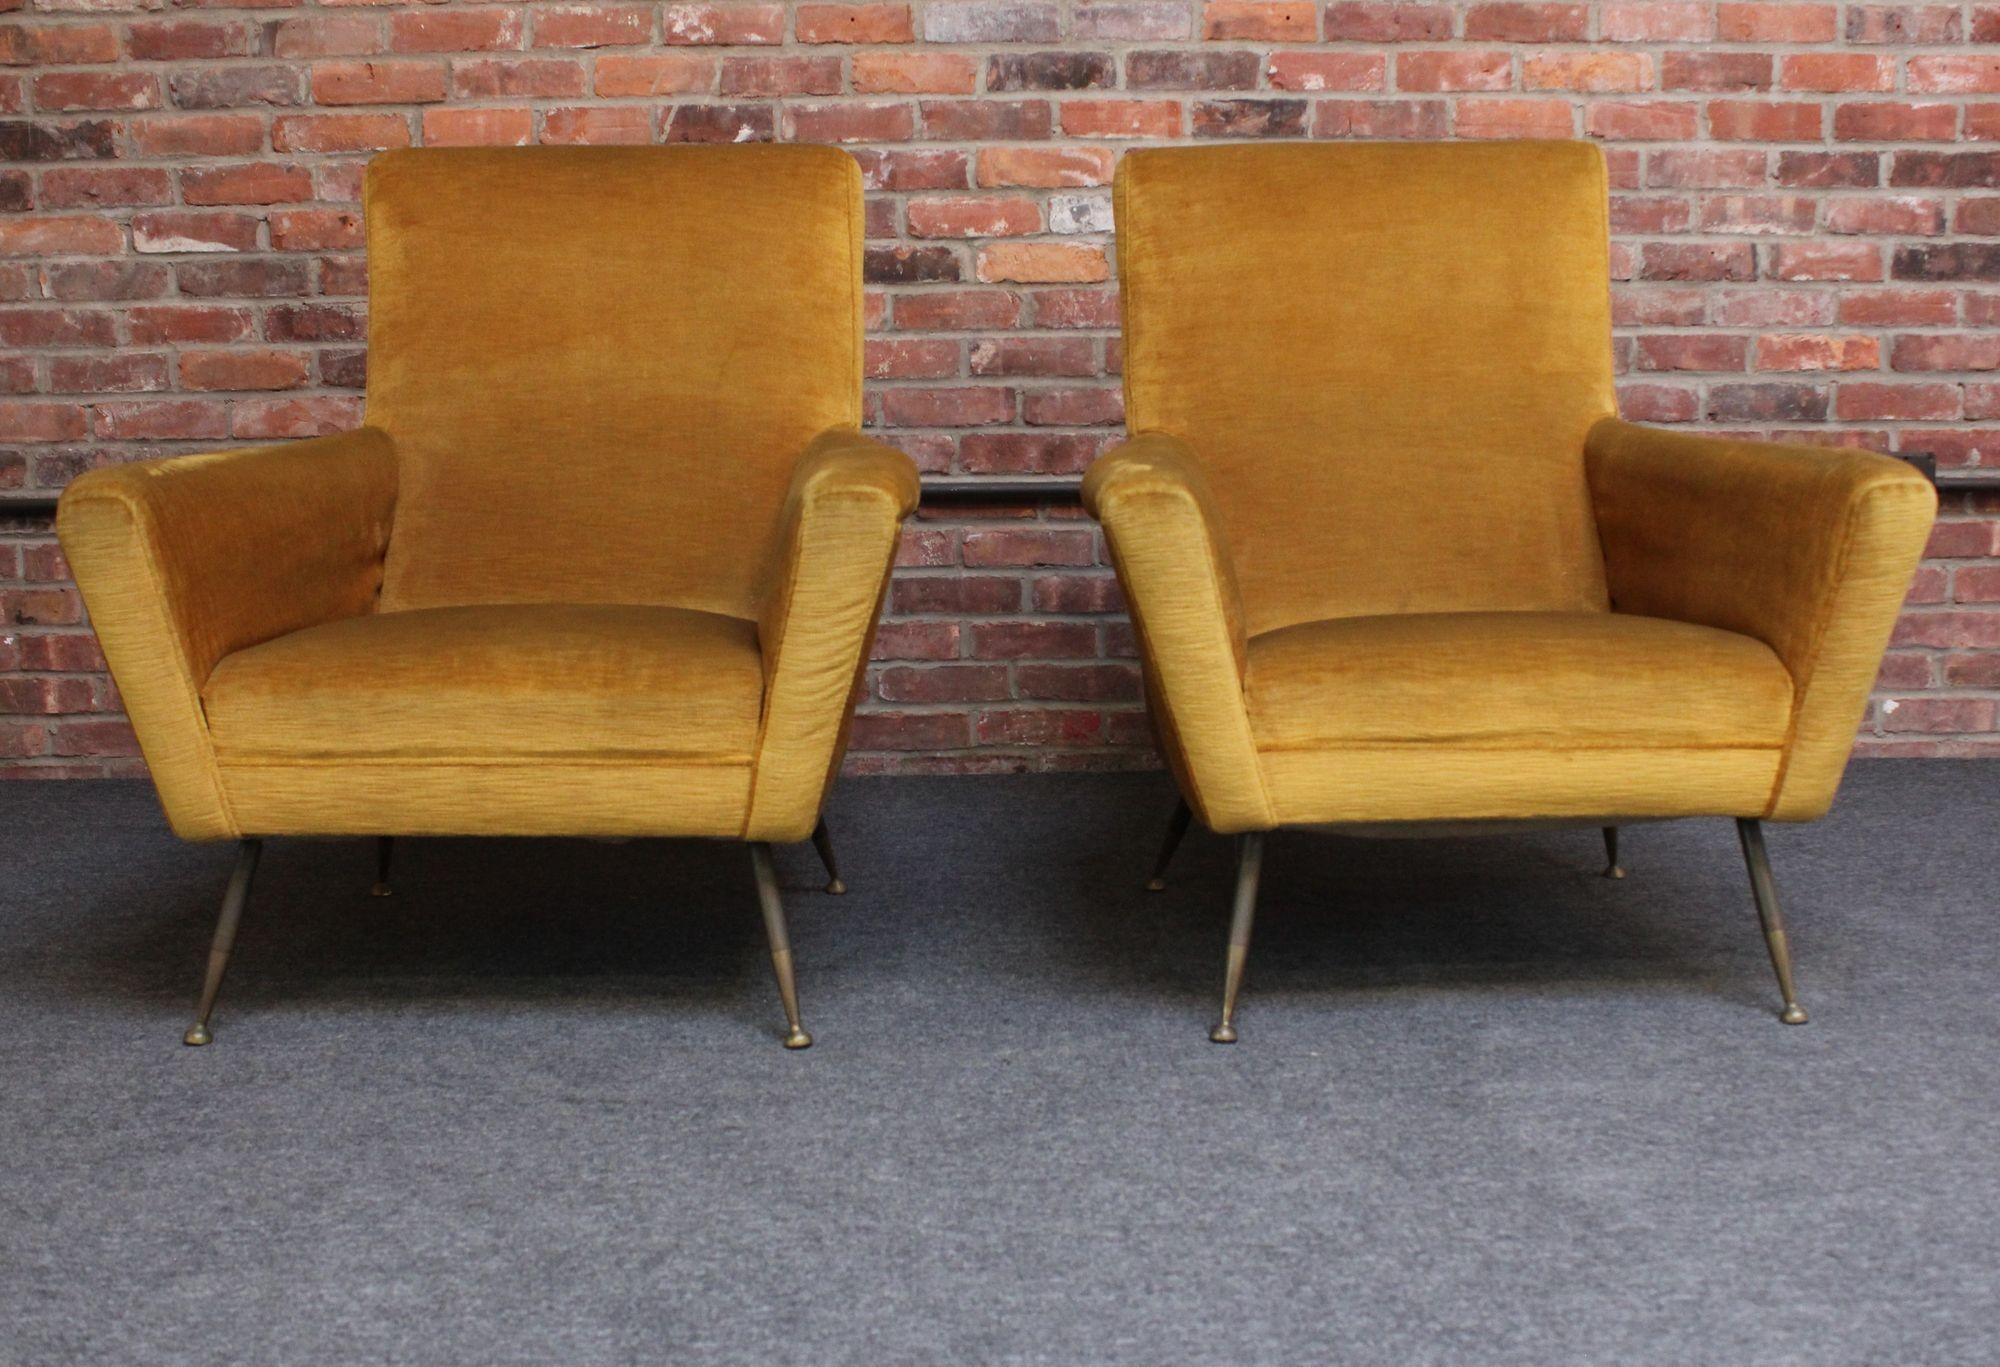 Mid-20th Century Italian Modernist lounge/arm chairs in original ochre cotton velvet upholstery (ca. 1960s, Italy).
Low slung form with wide, sculptural arms, all supported by four splayed, two-tone brass legs.
Original upholstery shows wear